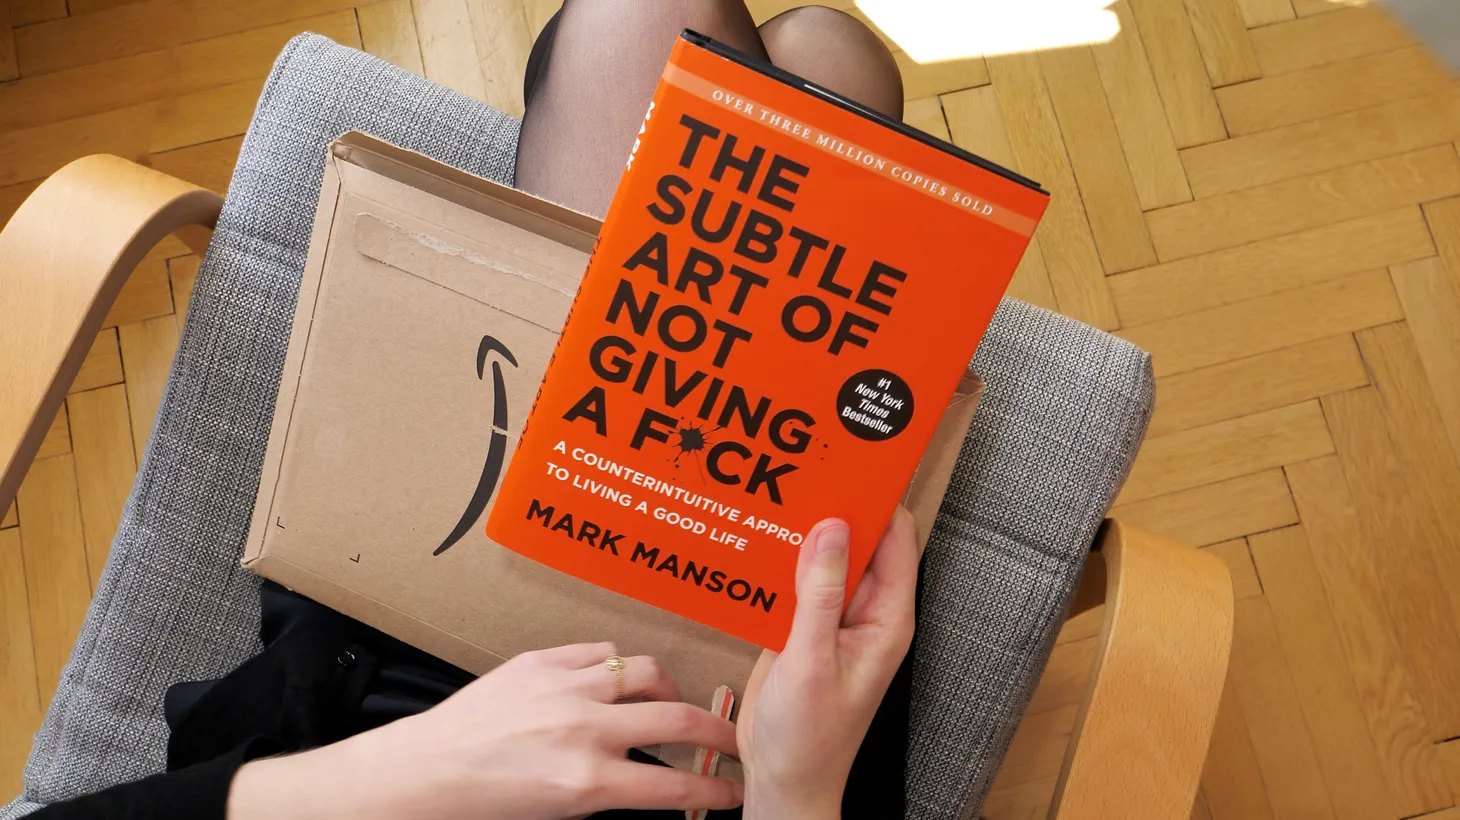 Mark Manson’s book, “The Subtle Art of Not Giving a F*ck: A Counterintuitive Approach to Living a Good Life,” is now a documentary film available for digital download.